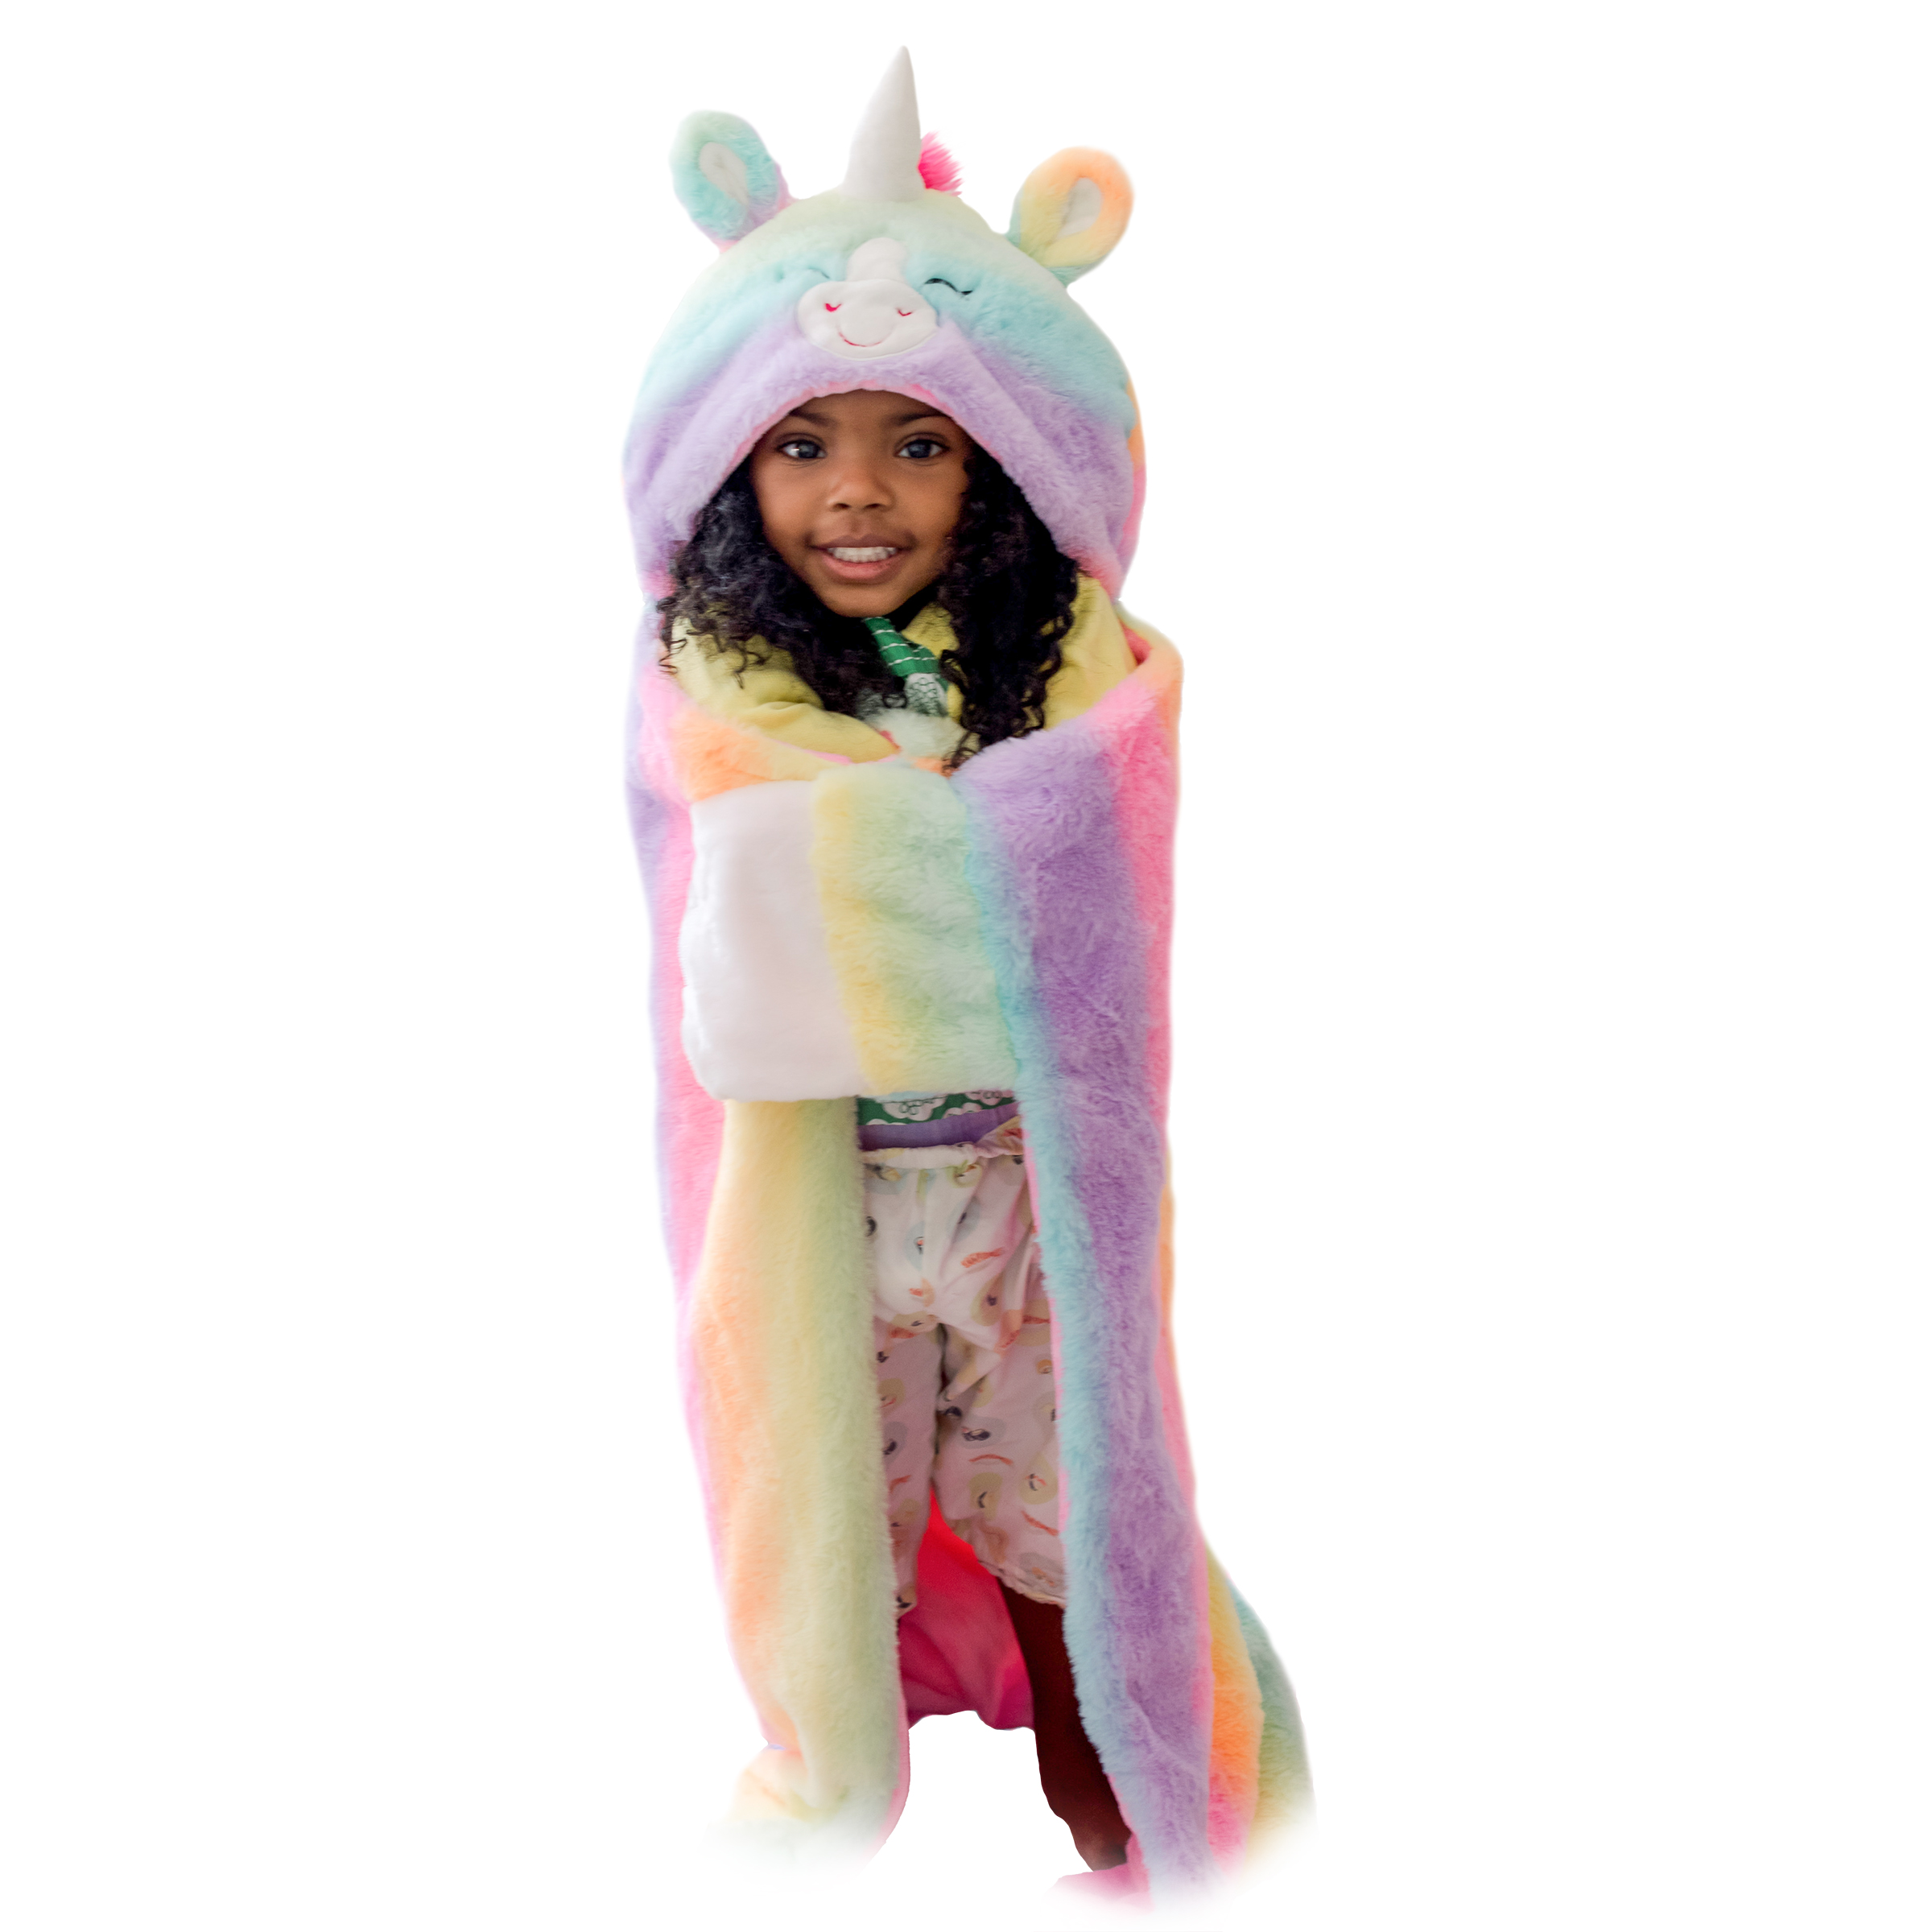 Animal Adventure® Wild for Style™ 2-in-1 Transformable Character Cape & Plush Pal – Unicorn - image 1 of 7